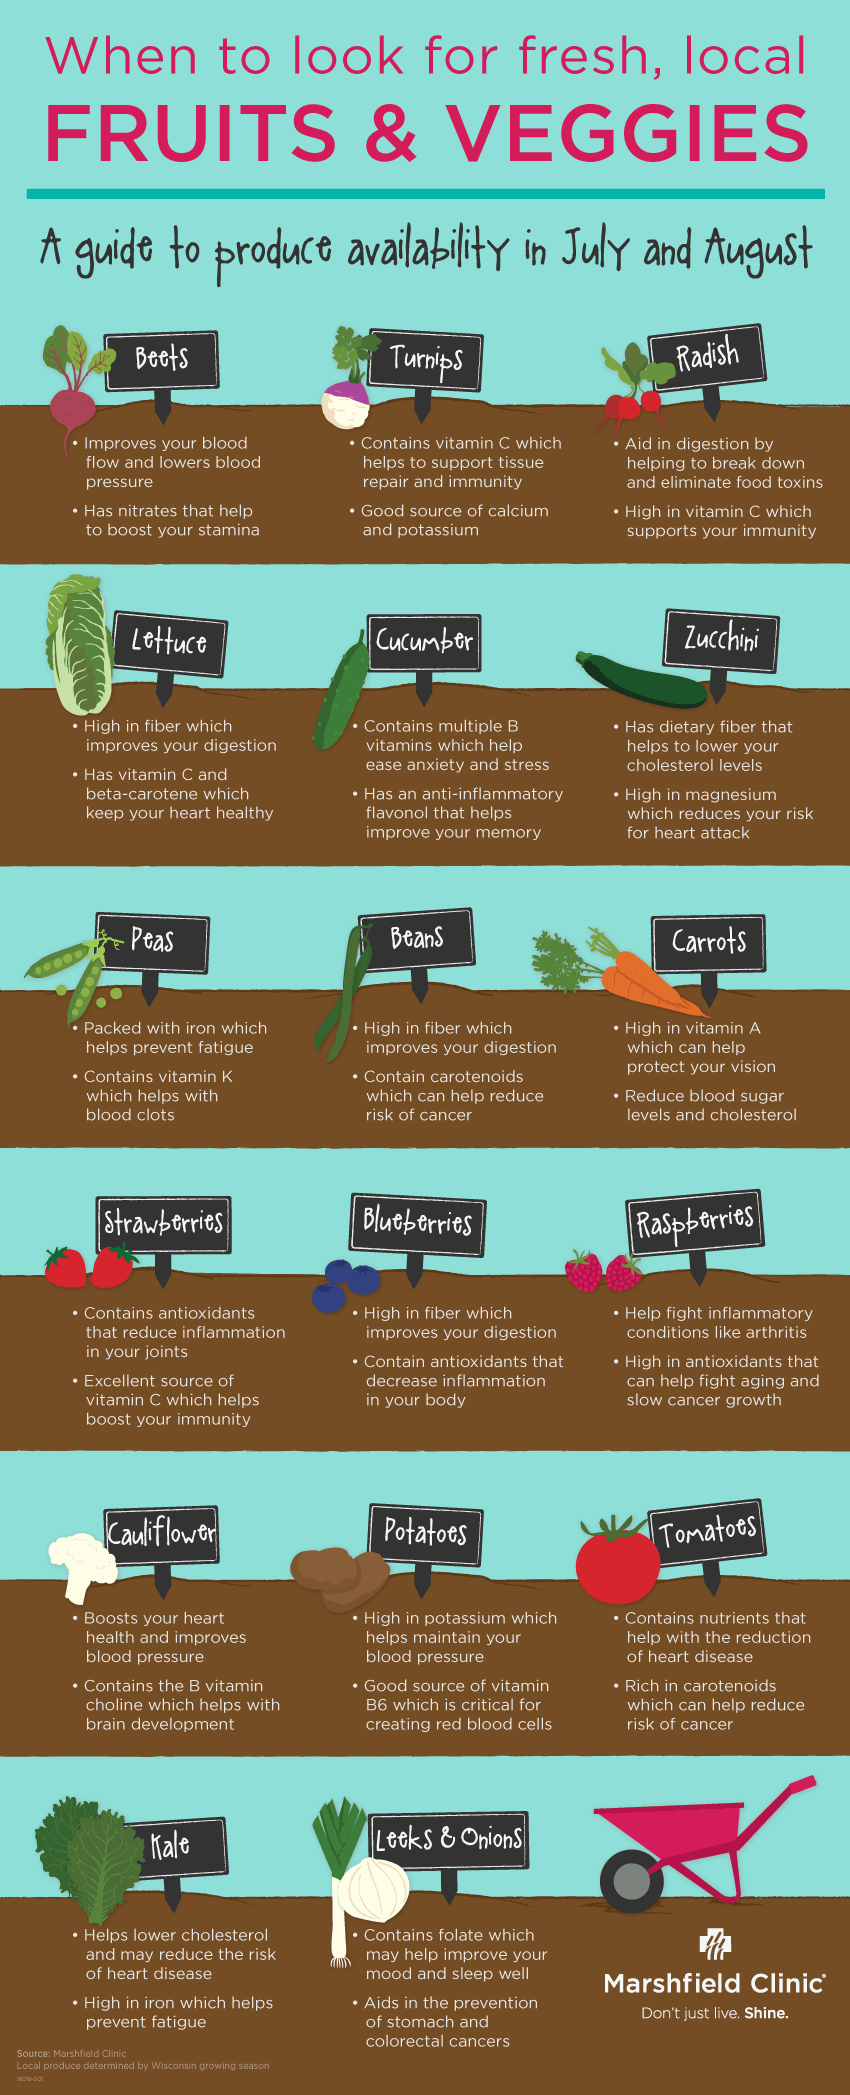 Farmer's Market Chart - July and August